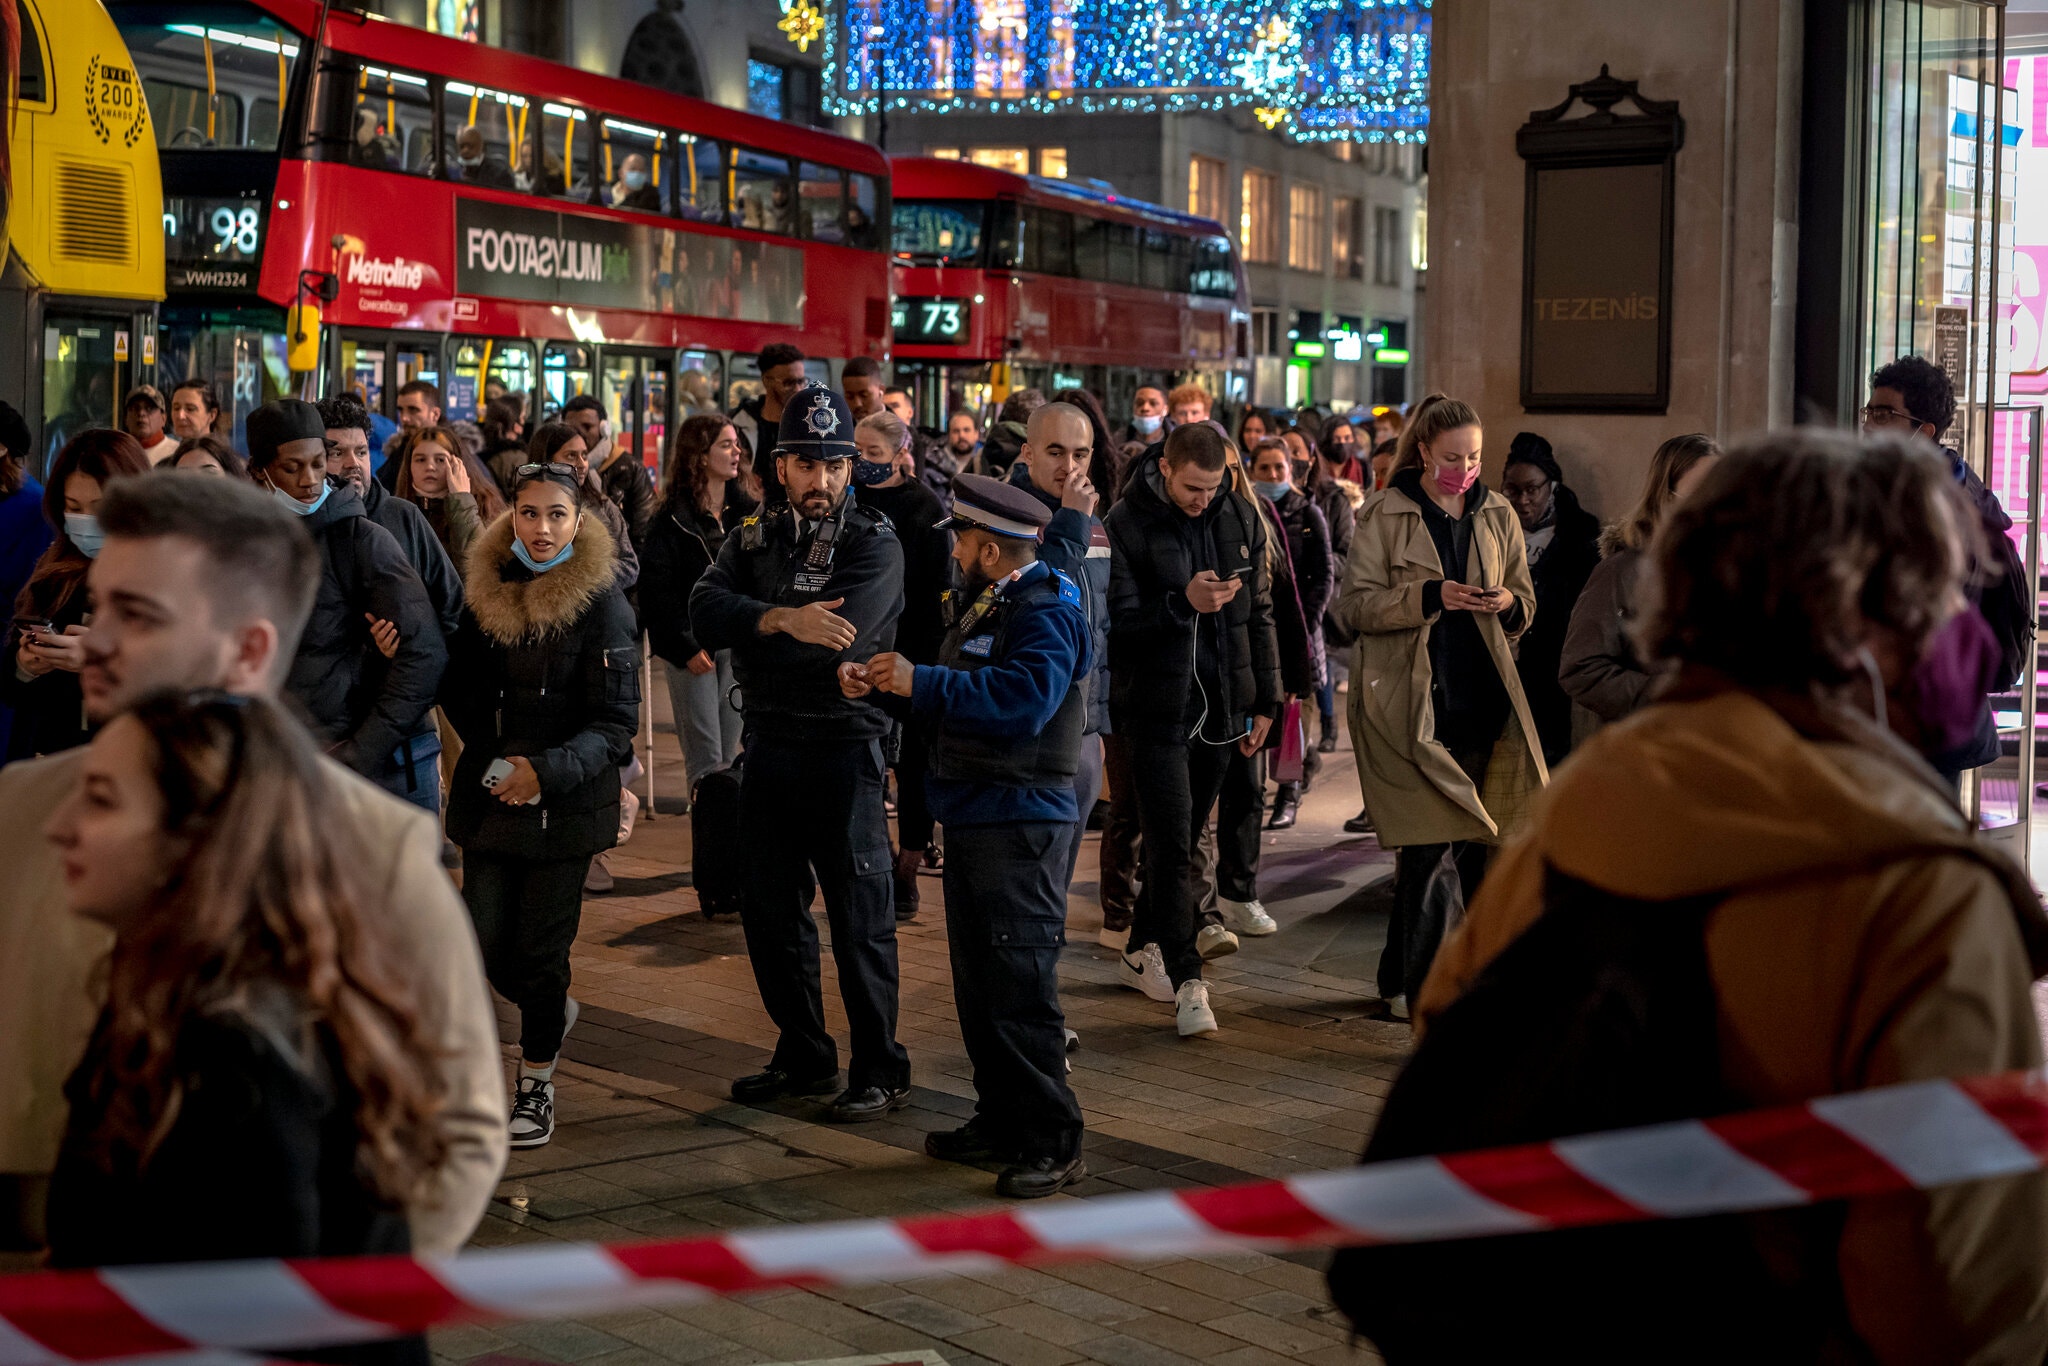 Shopping in Oxford Circus in London last week. The new lockdown will apply to nearly 20 million people, a third of England's population.Credit...Andrew Testa for The New York Times